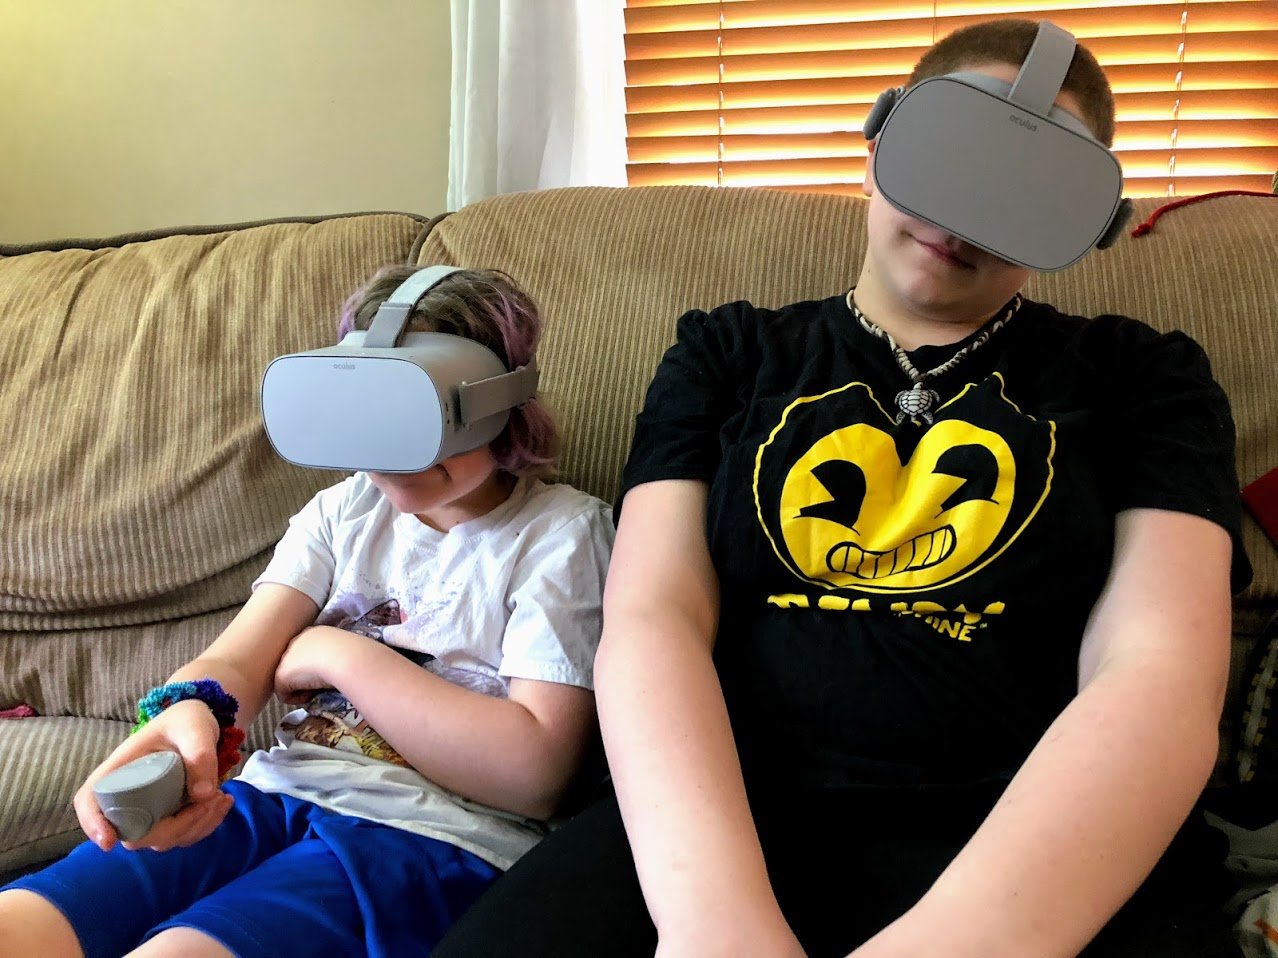 Oculus Go is great for kids